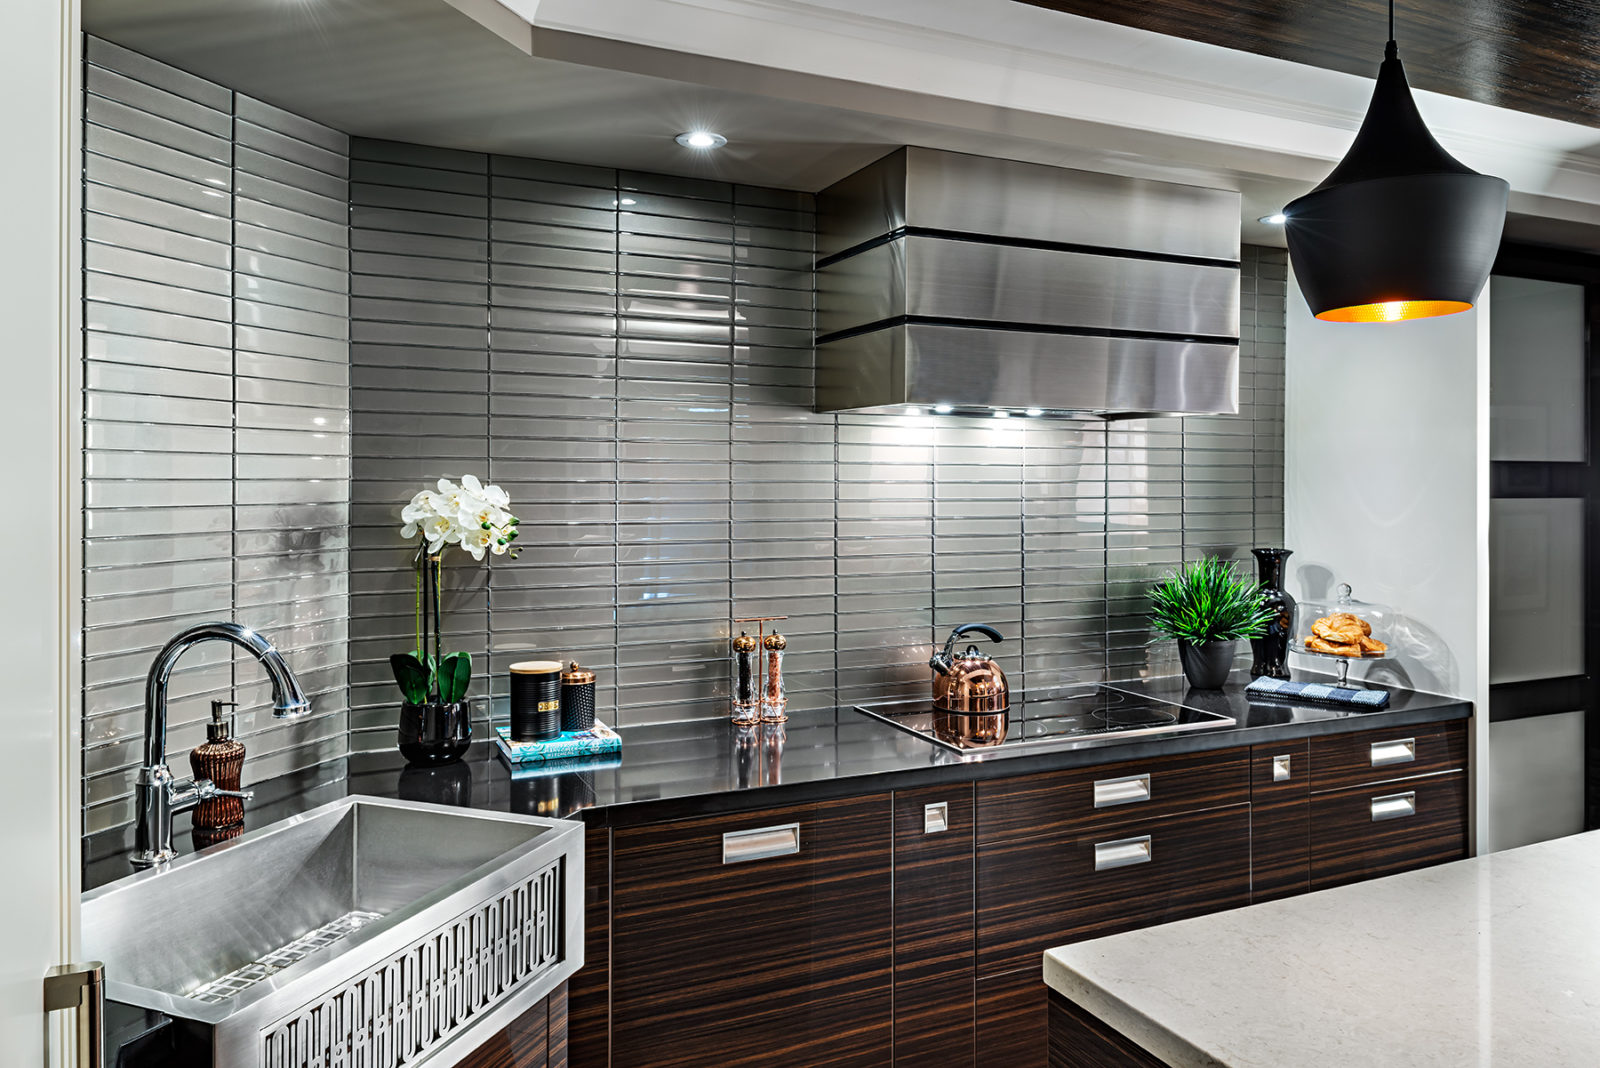 Mixing metal fixtures and accents in a contemporary kitchen